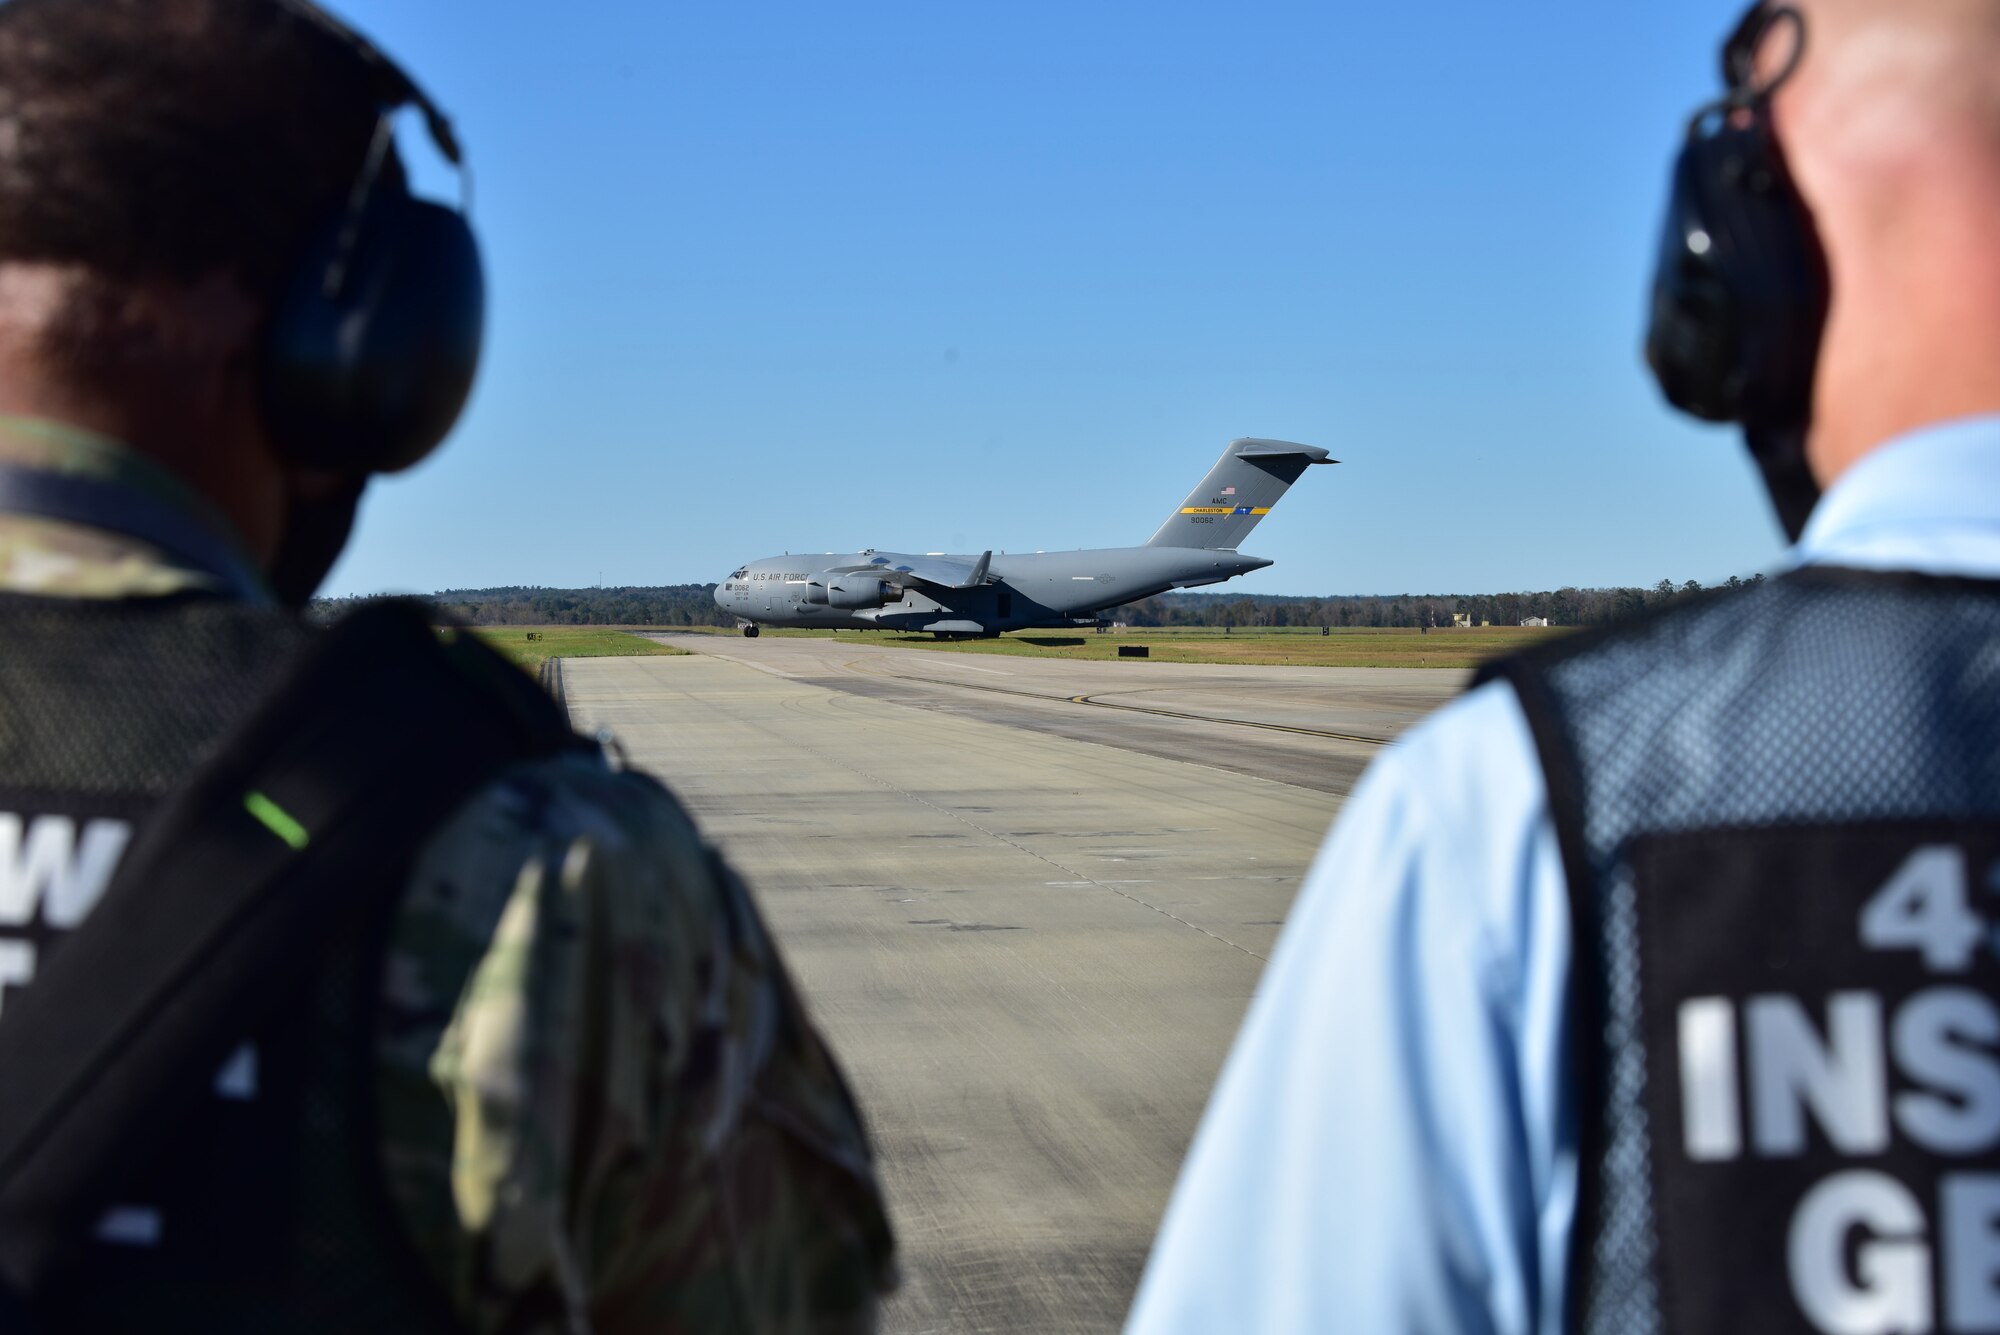 U.S. Air Force Master Sgt. Bradley Moorer, an Inspector General Wing Inspection Team superintendent for the 437th Airlift Wing (right), and Mark Vickers, the 437th AW IG director of inspections (left), monitor Airmen offloading cargo from a C-17 Globemaster III, at McEntire Joint National Guard Base, S.C., Nov. 16, 2020. Palmetto Challenge is a global mobilization exercise held at McEntire Joint National Guard Base, S.C., and Pope Army Airfield, N.C. The exercise is held in order to develop readiness and awareness in a simulated deployed environment for over 100 Airmen from Joint Base Charleston.